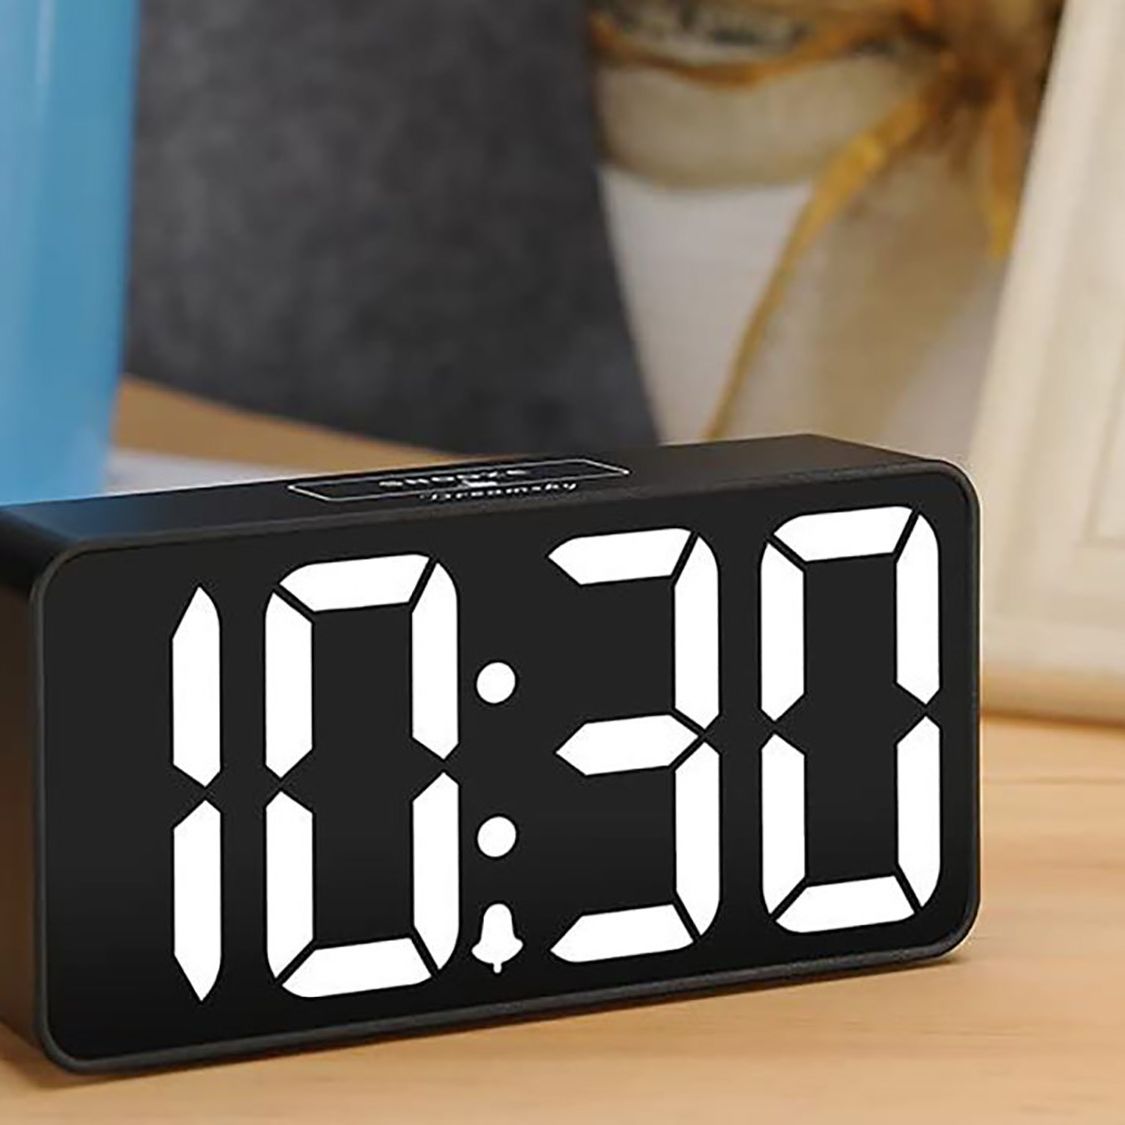 The DreamSky alarm clock is on sale for almost 40% off